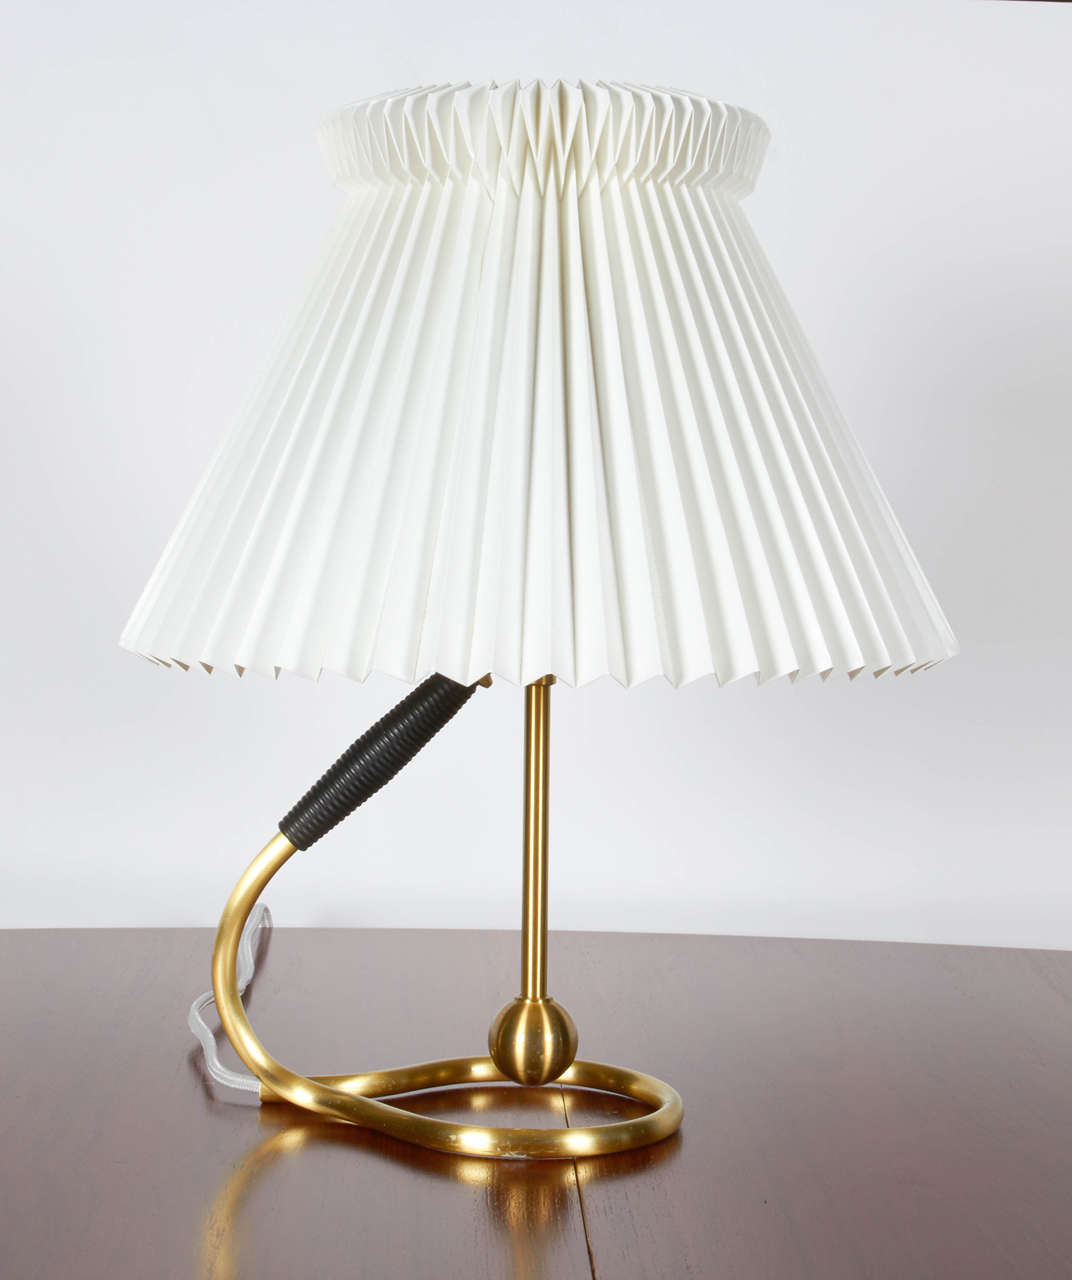 Pair of vintage Kaare Klint table lamps.  With its tilt function, it easily converts from a wall lamp to a table lamp, and vice versa.  These lamps were purchased from the original owner who brought them back from Denmark in the 1960's.